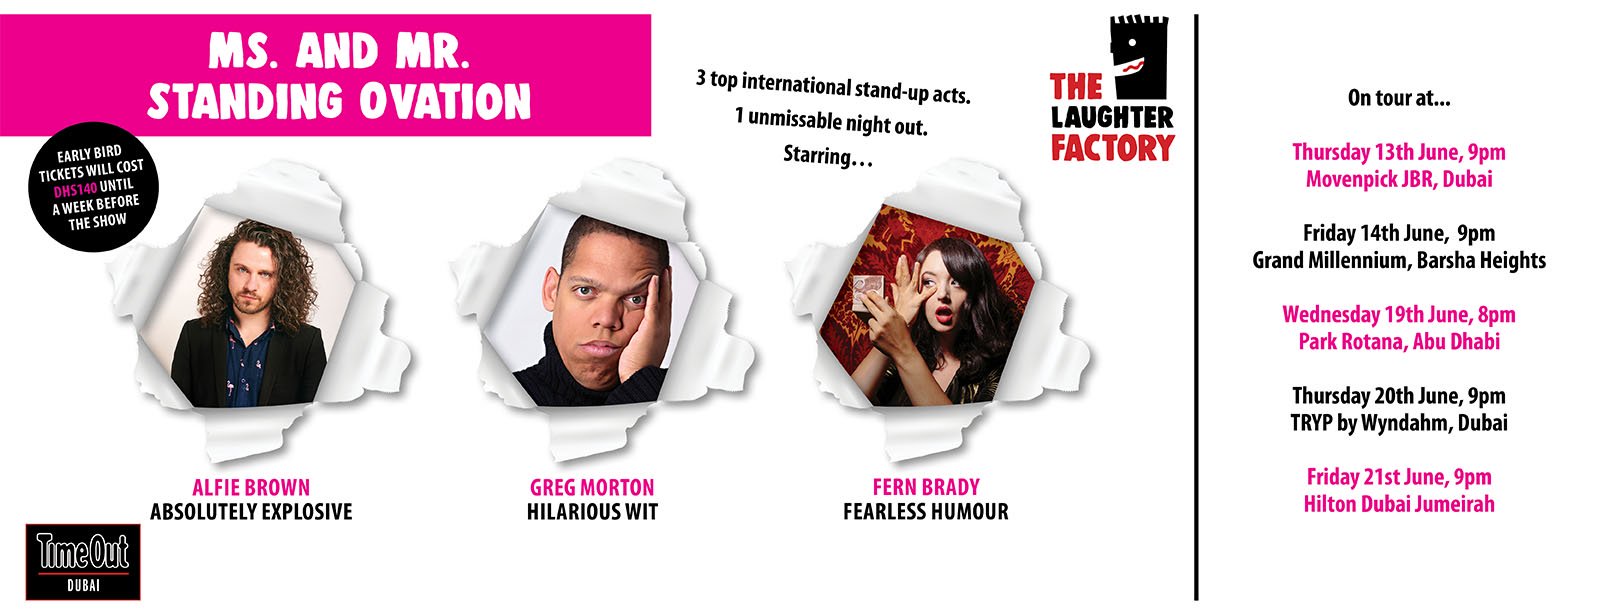 The Laughter Factory: Ms. & Mr Standing Ovation Tour - Coming Soon in UAE